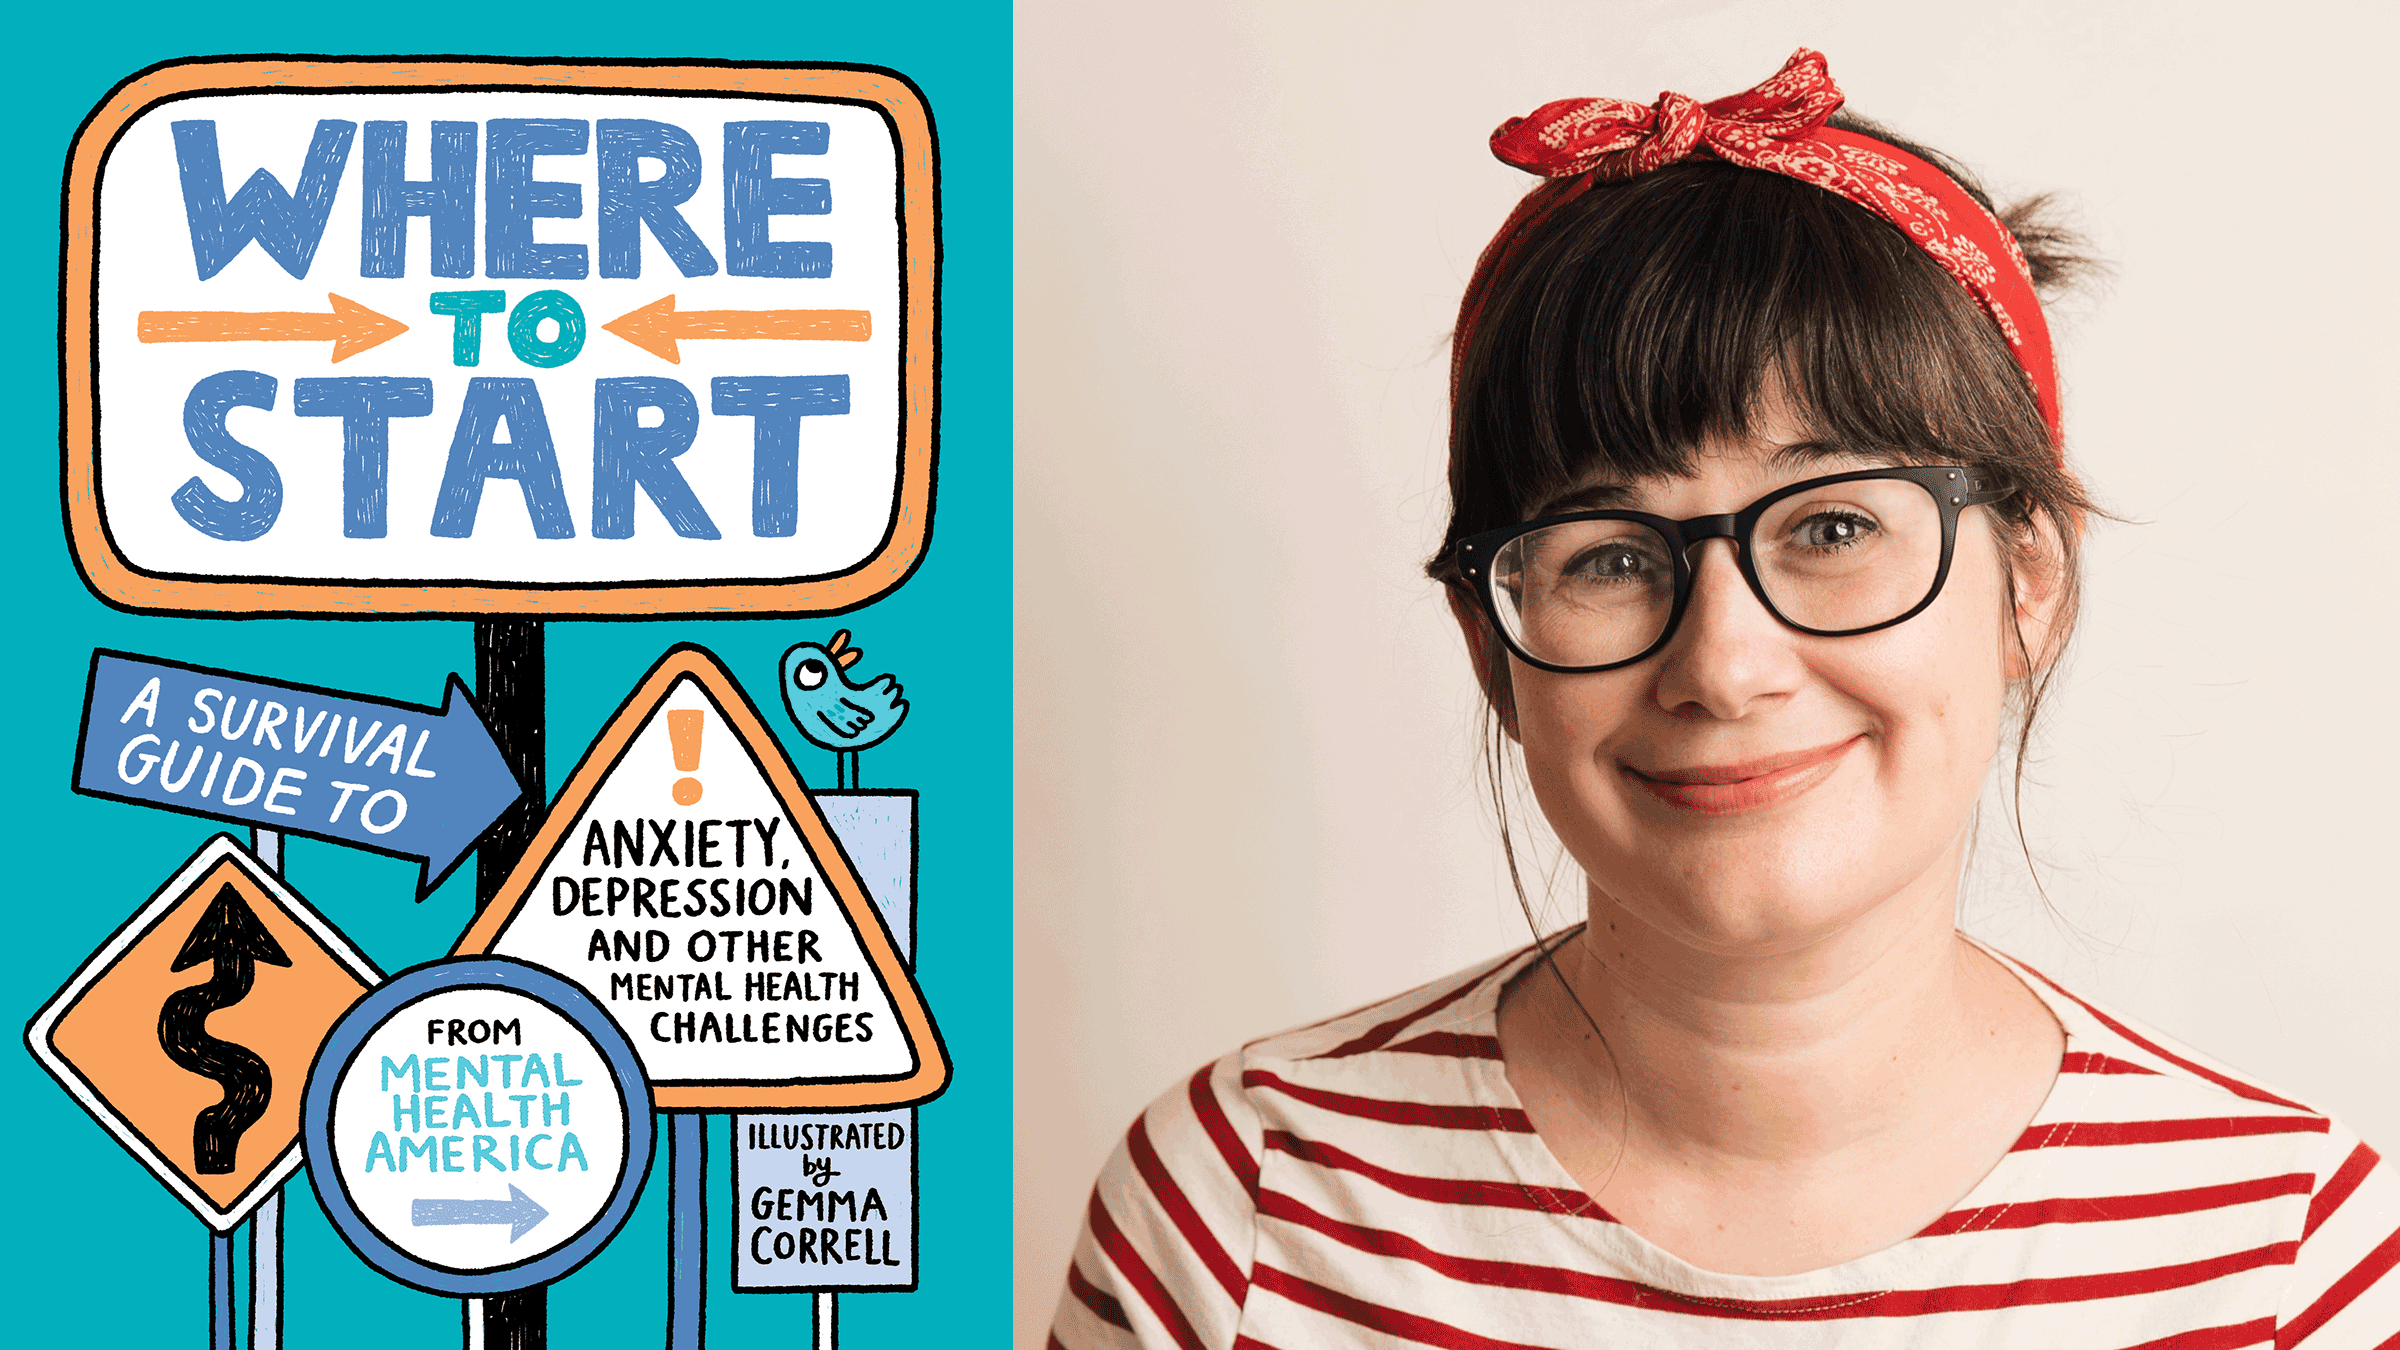 Where to Start book cover and headshot of Gemma Correll